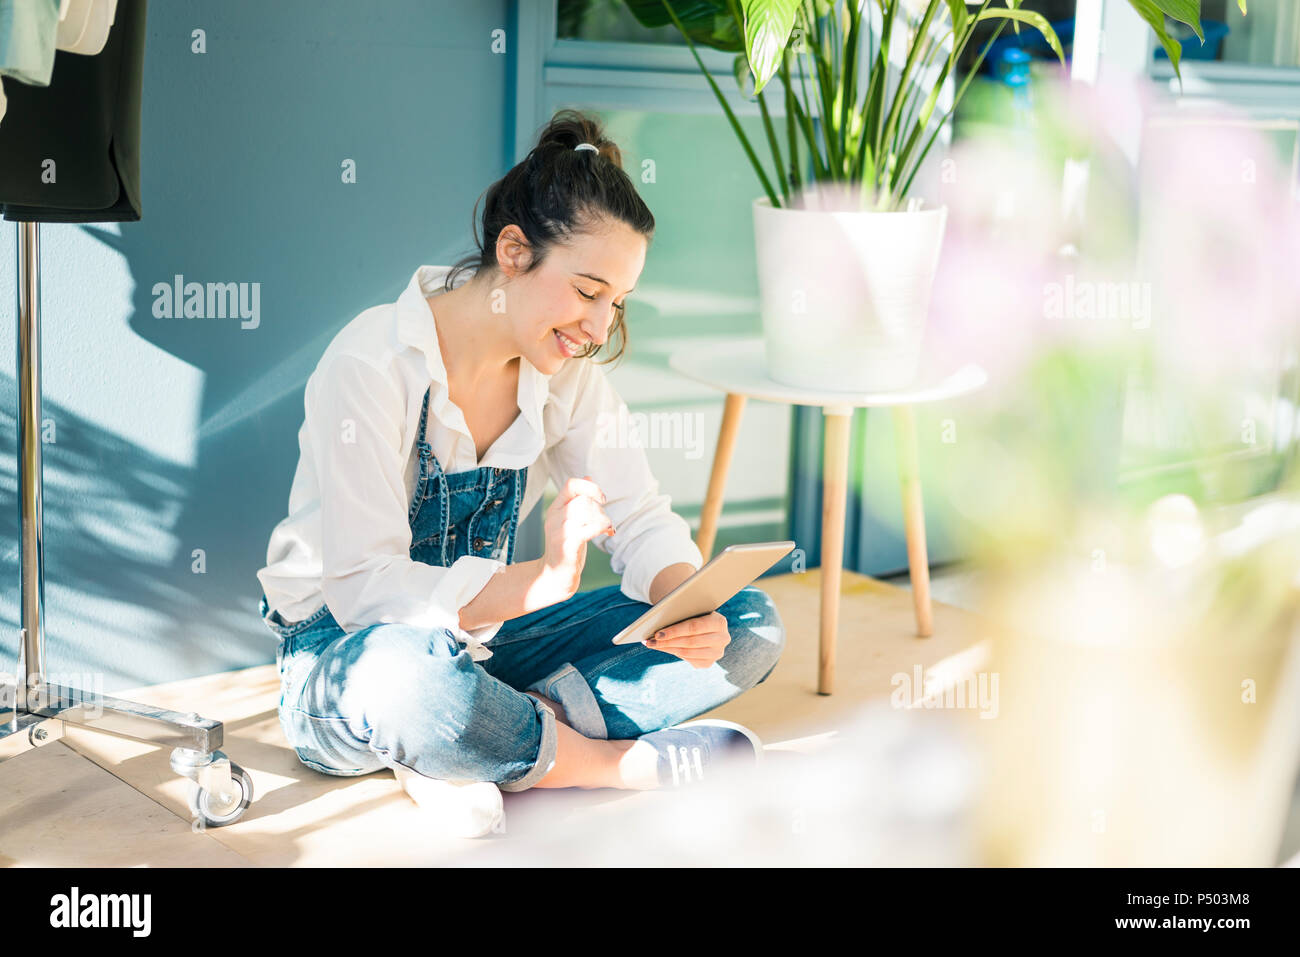 Smiling young freelancer sitting on the floor in her studio using tablet Stock Photo